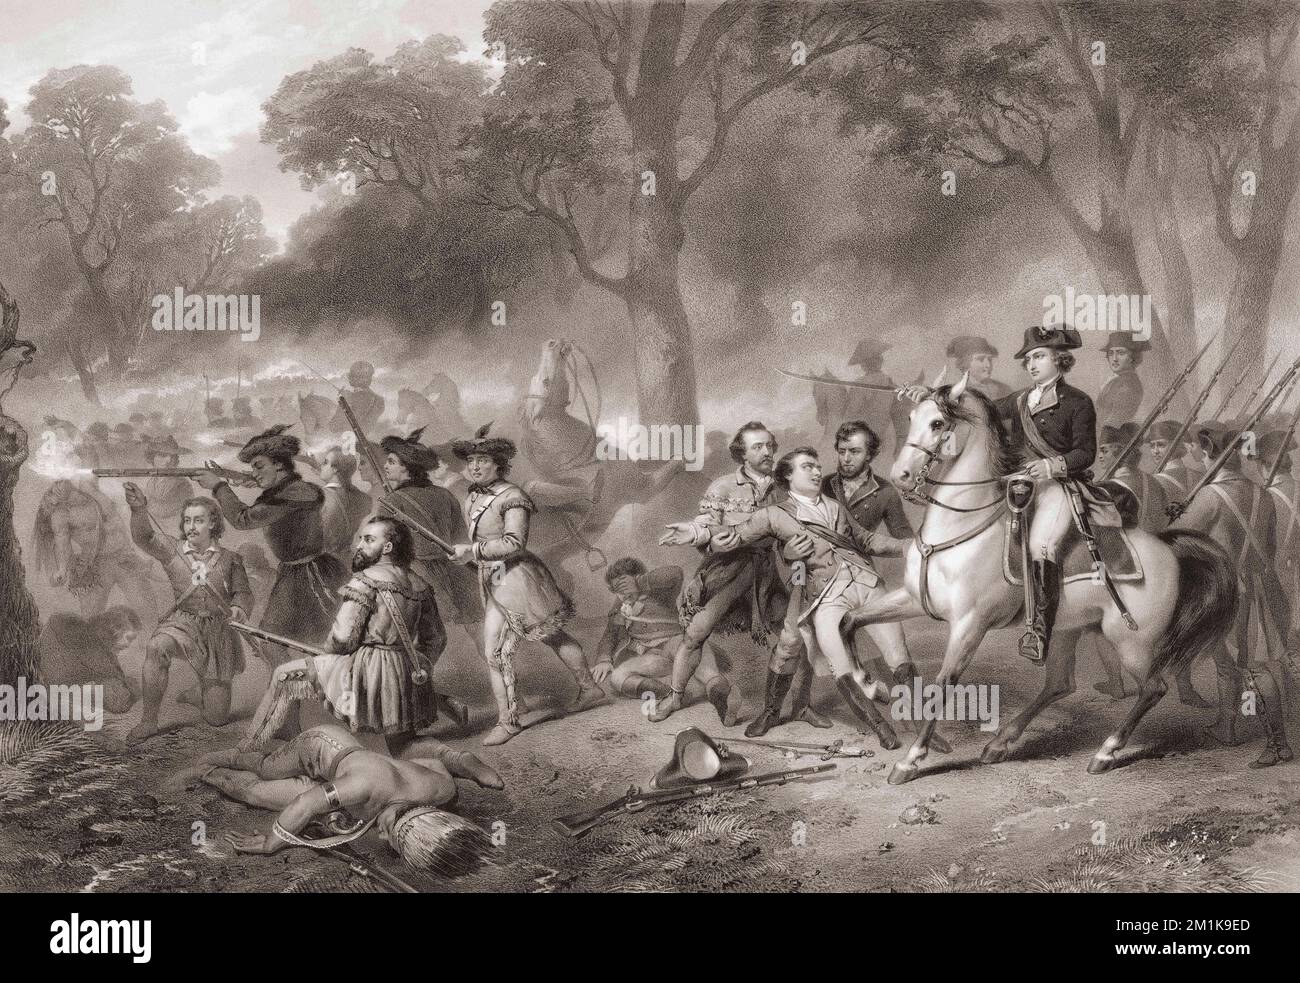 George Washington at the Battle of the Monongahela, July 9, 1755, during the French and Indian War, when Colonel Washington was under the command of British General Edward Braddock.  The British and American British forces were heavily defeated by the French and their Native American allies.  From a print by Claude Régnier after the painting by Junius Brutus Stearns Stock Photo